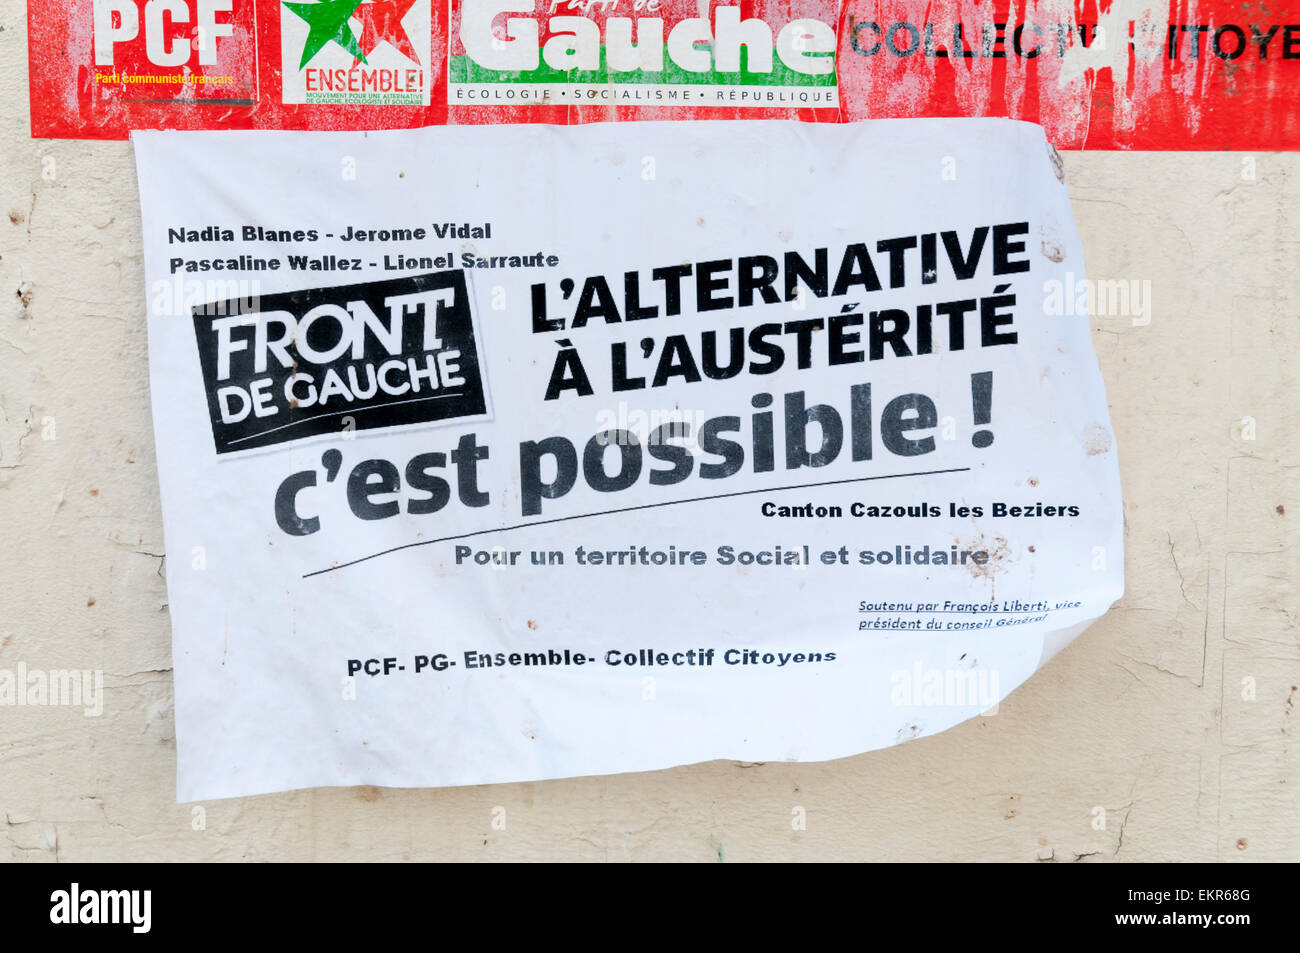 Front de Gauche political poster in France proposing an alternative to austerity. Stock Photo